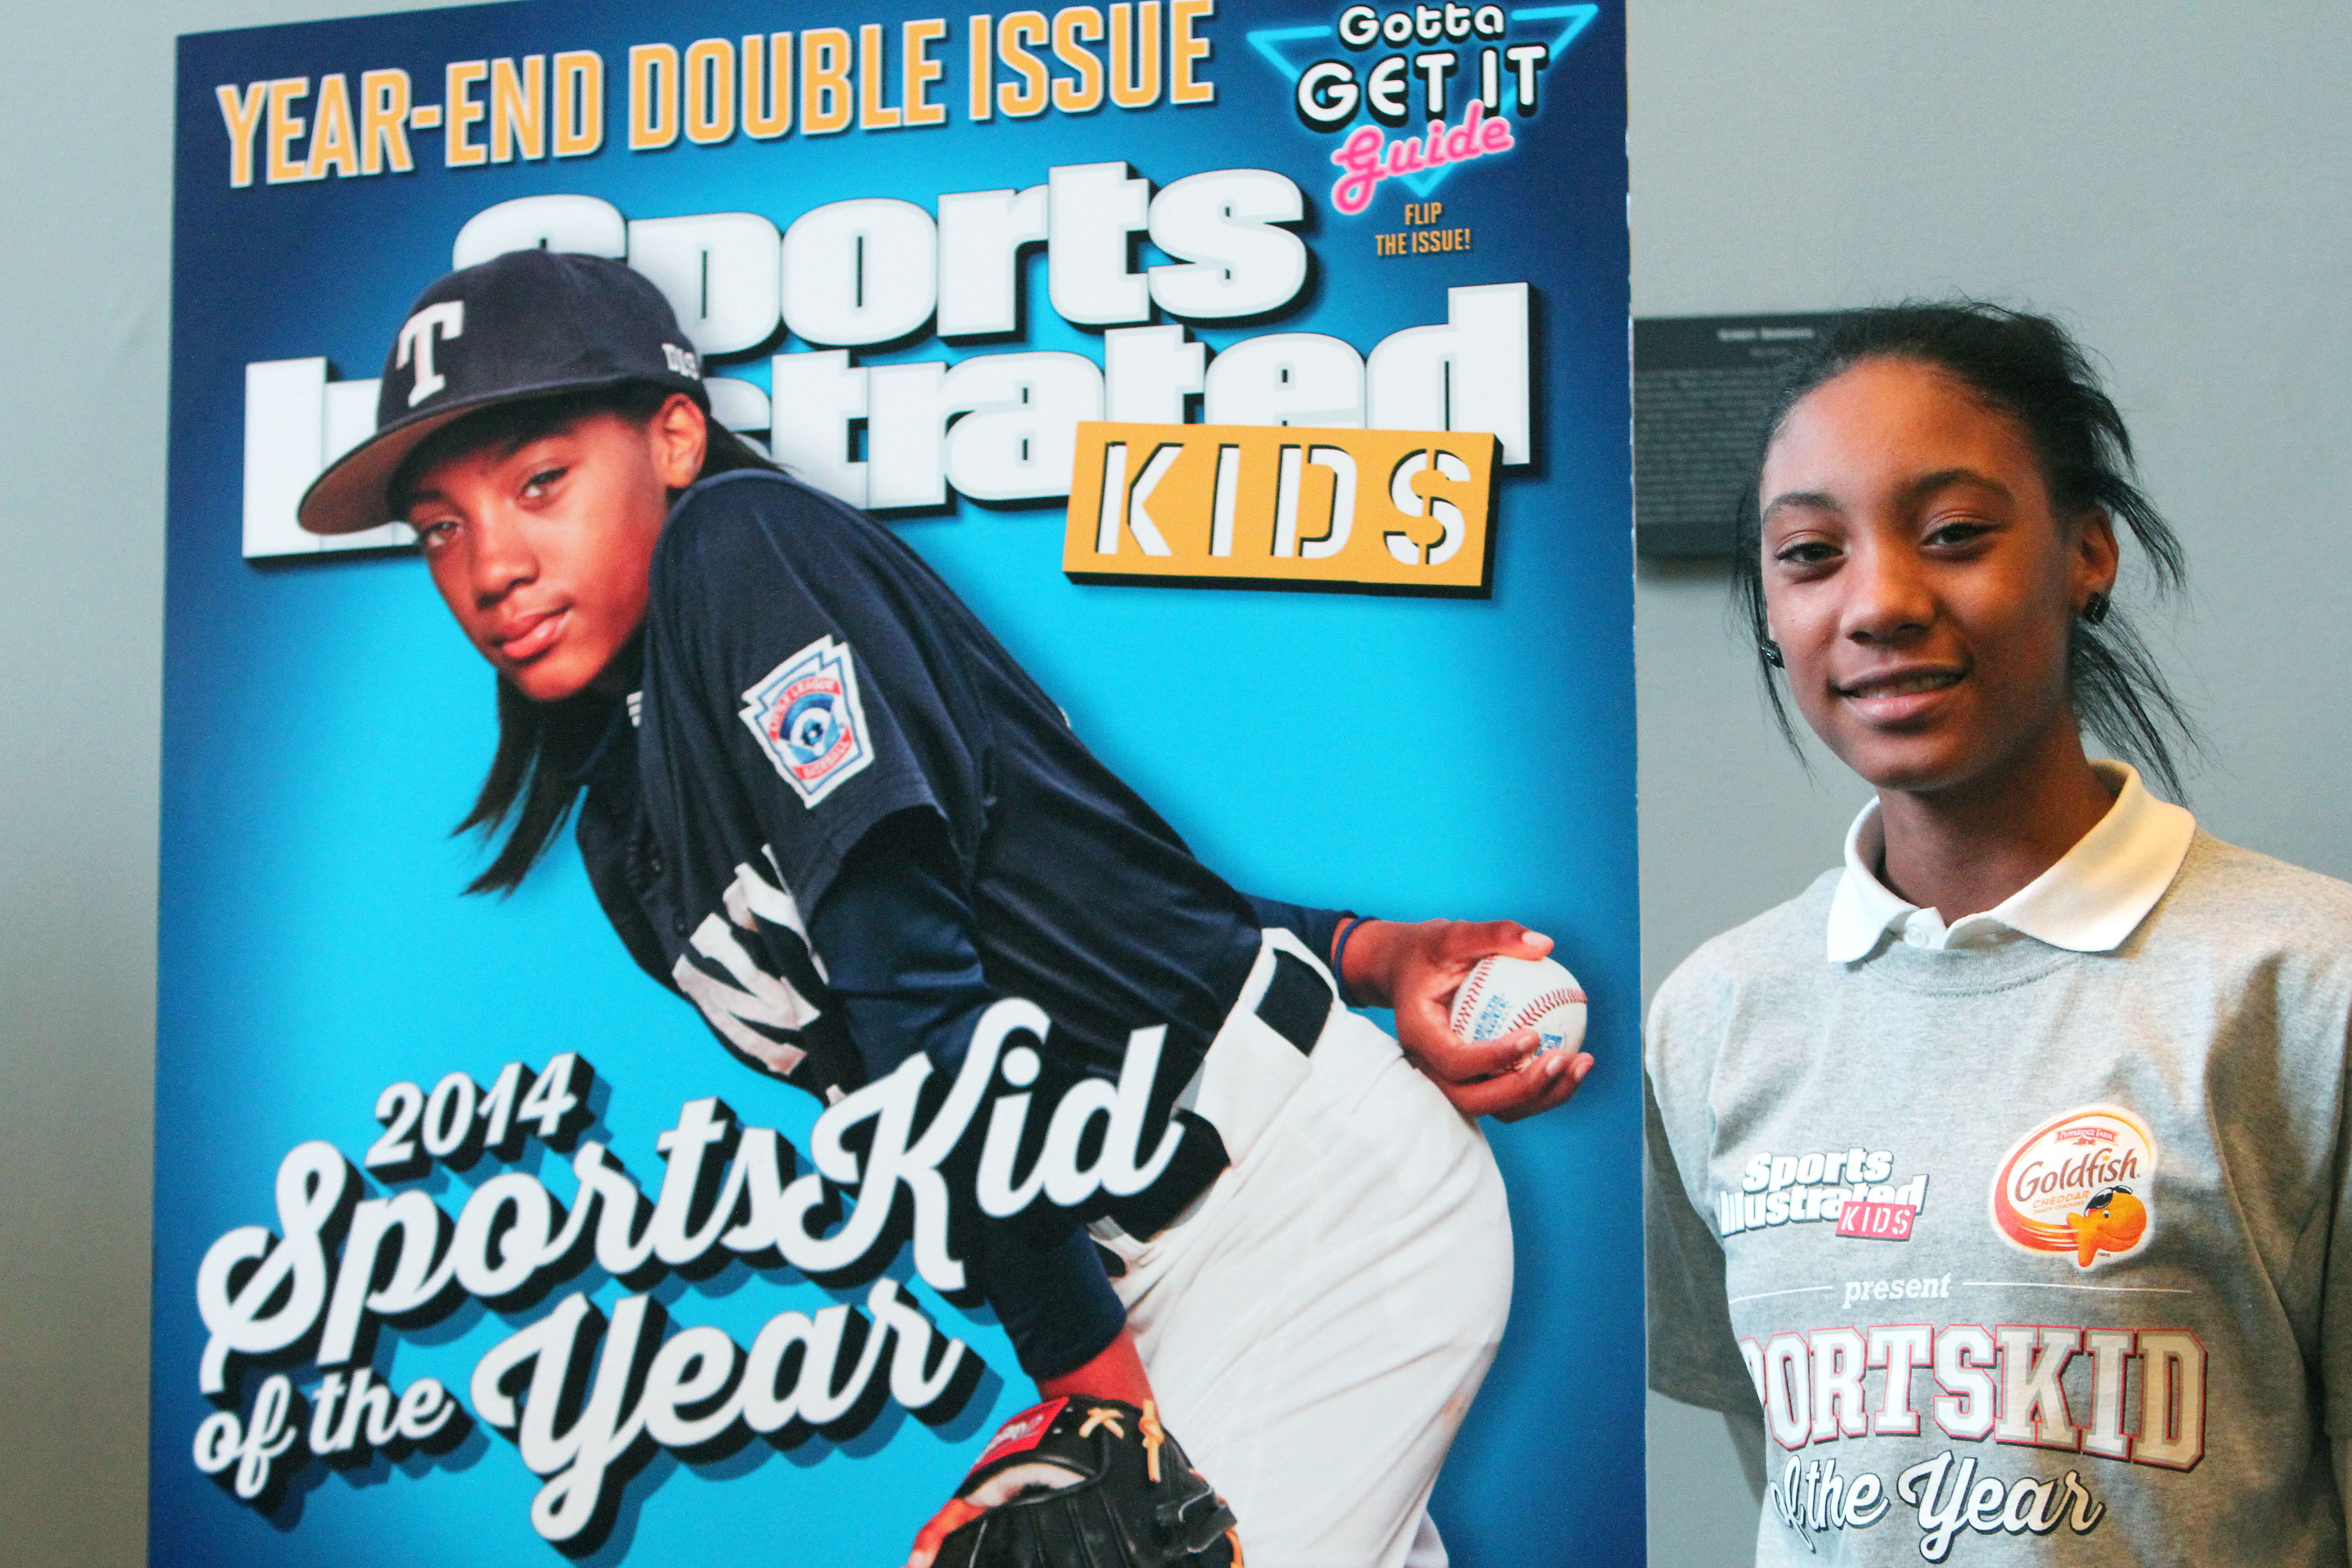 Mo'ne Davis Dominated the LLWS, But Where is She Now?